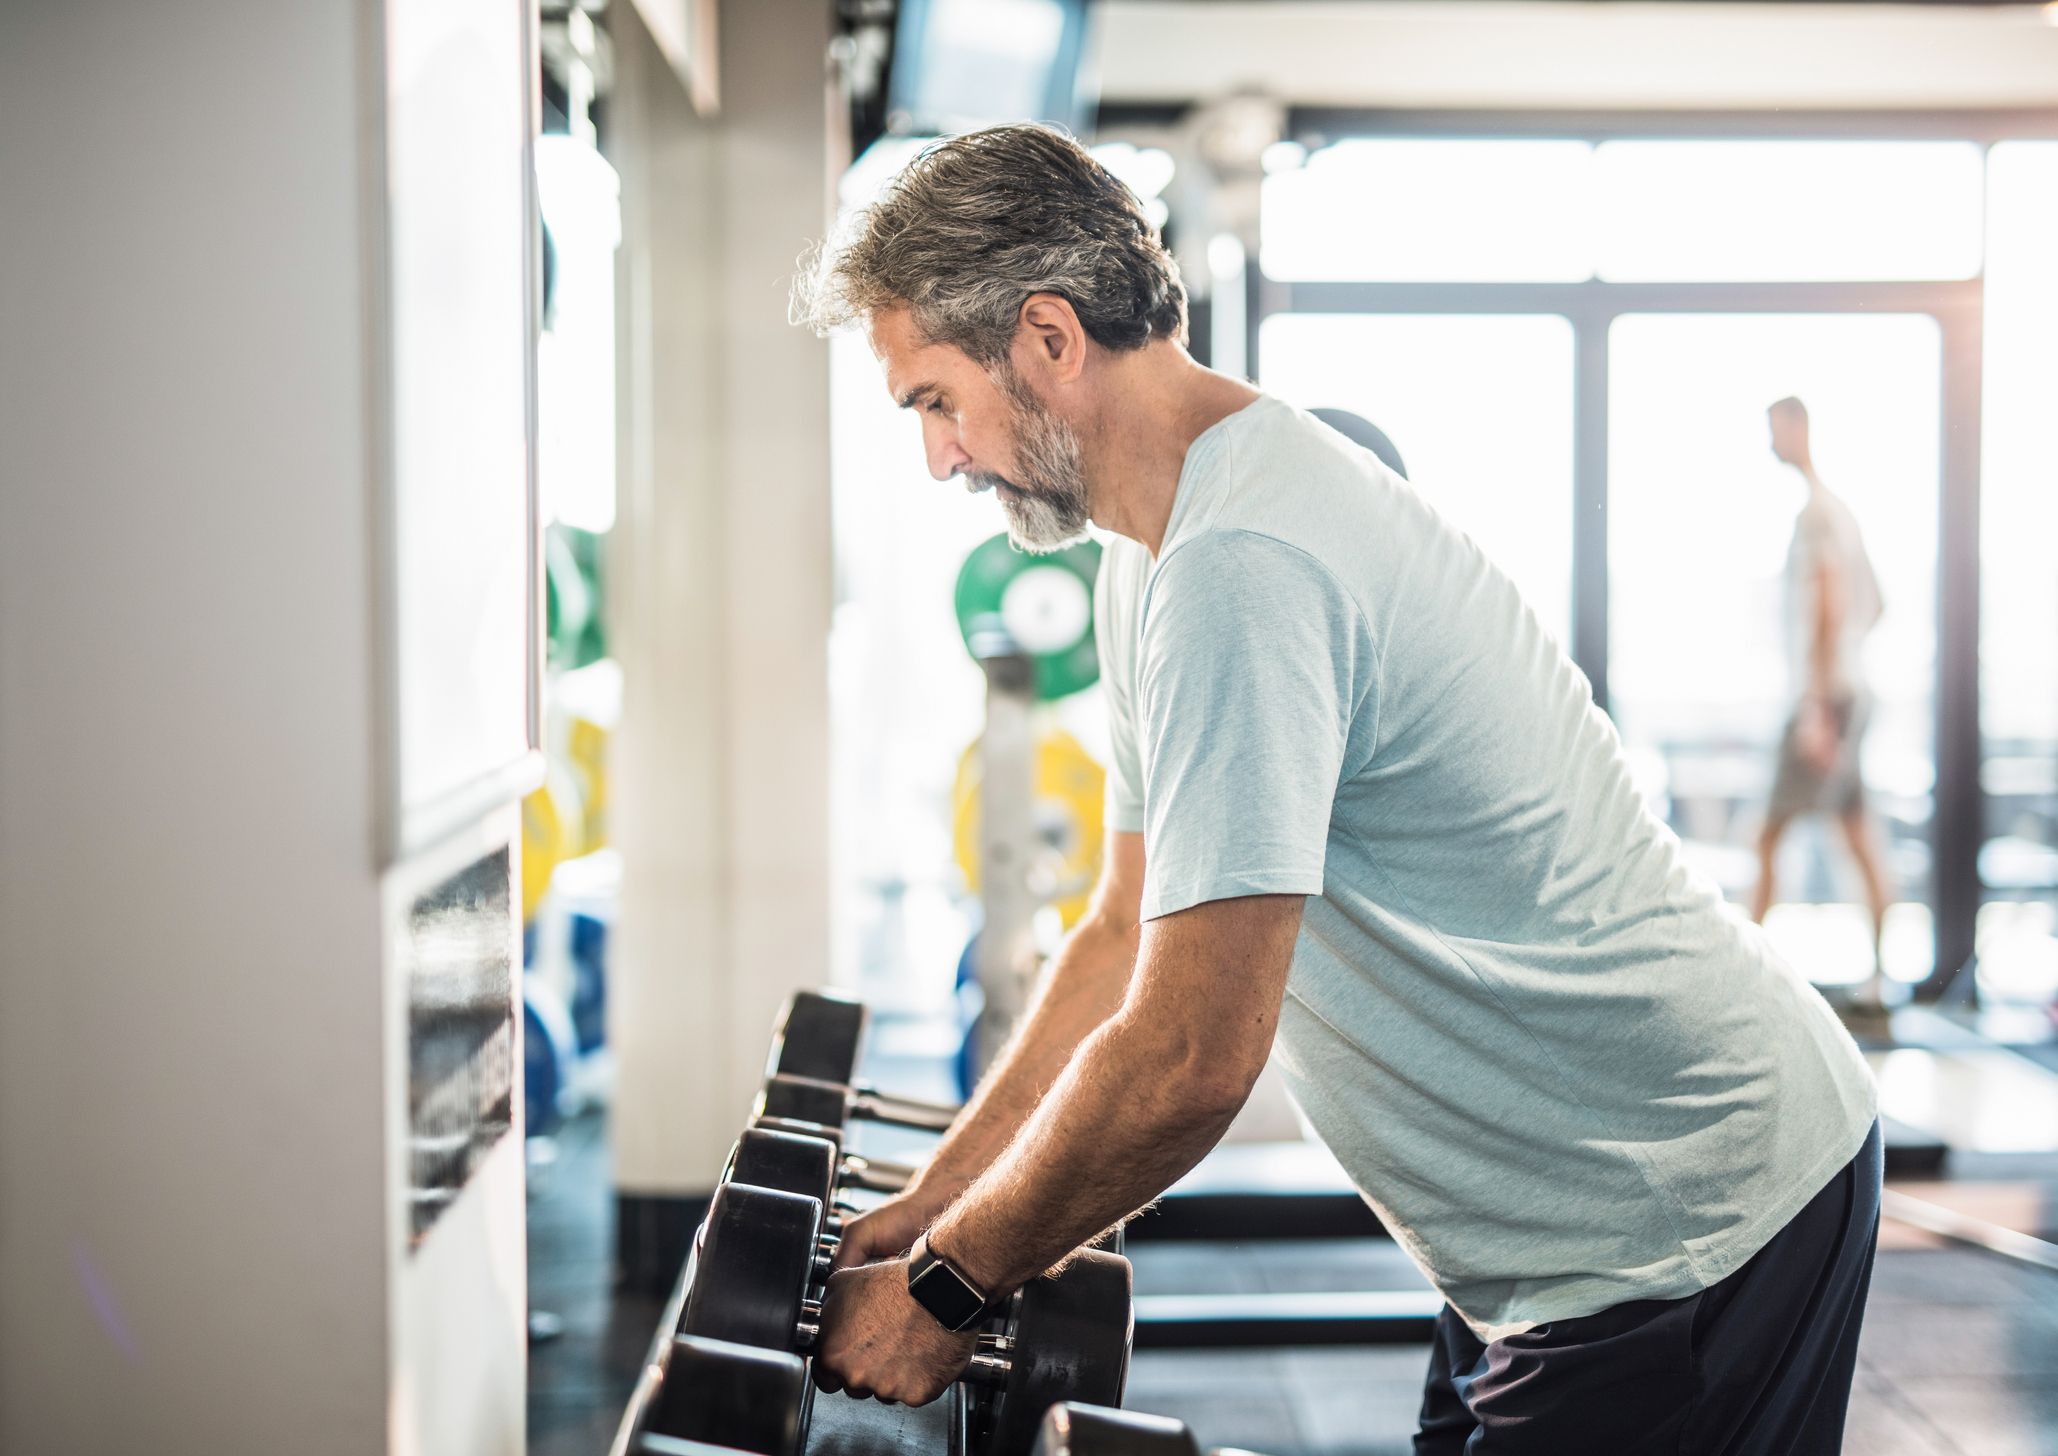 Men Over 40 Can Do the Bent-Over Dumbbell Row for Back Strength pic